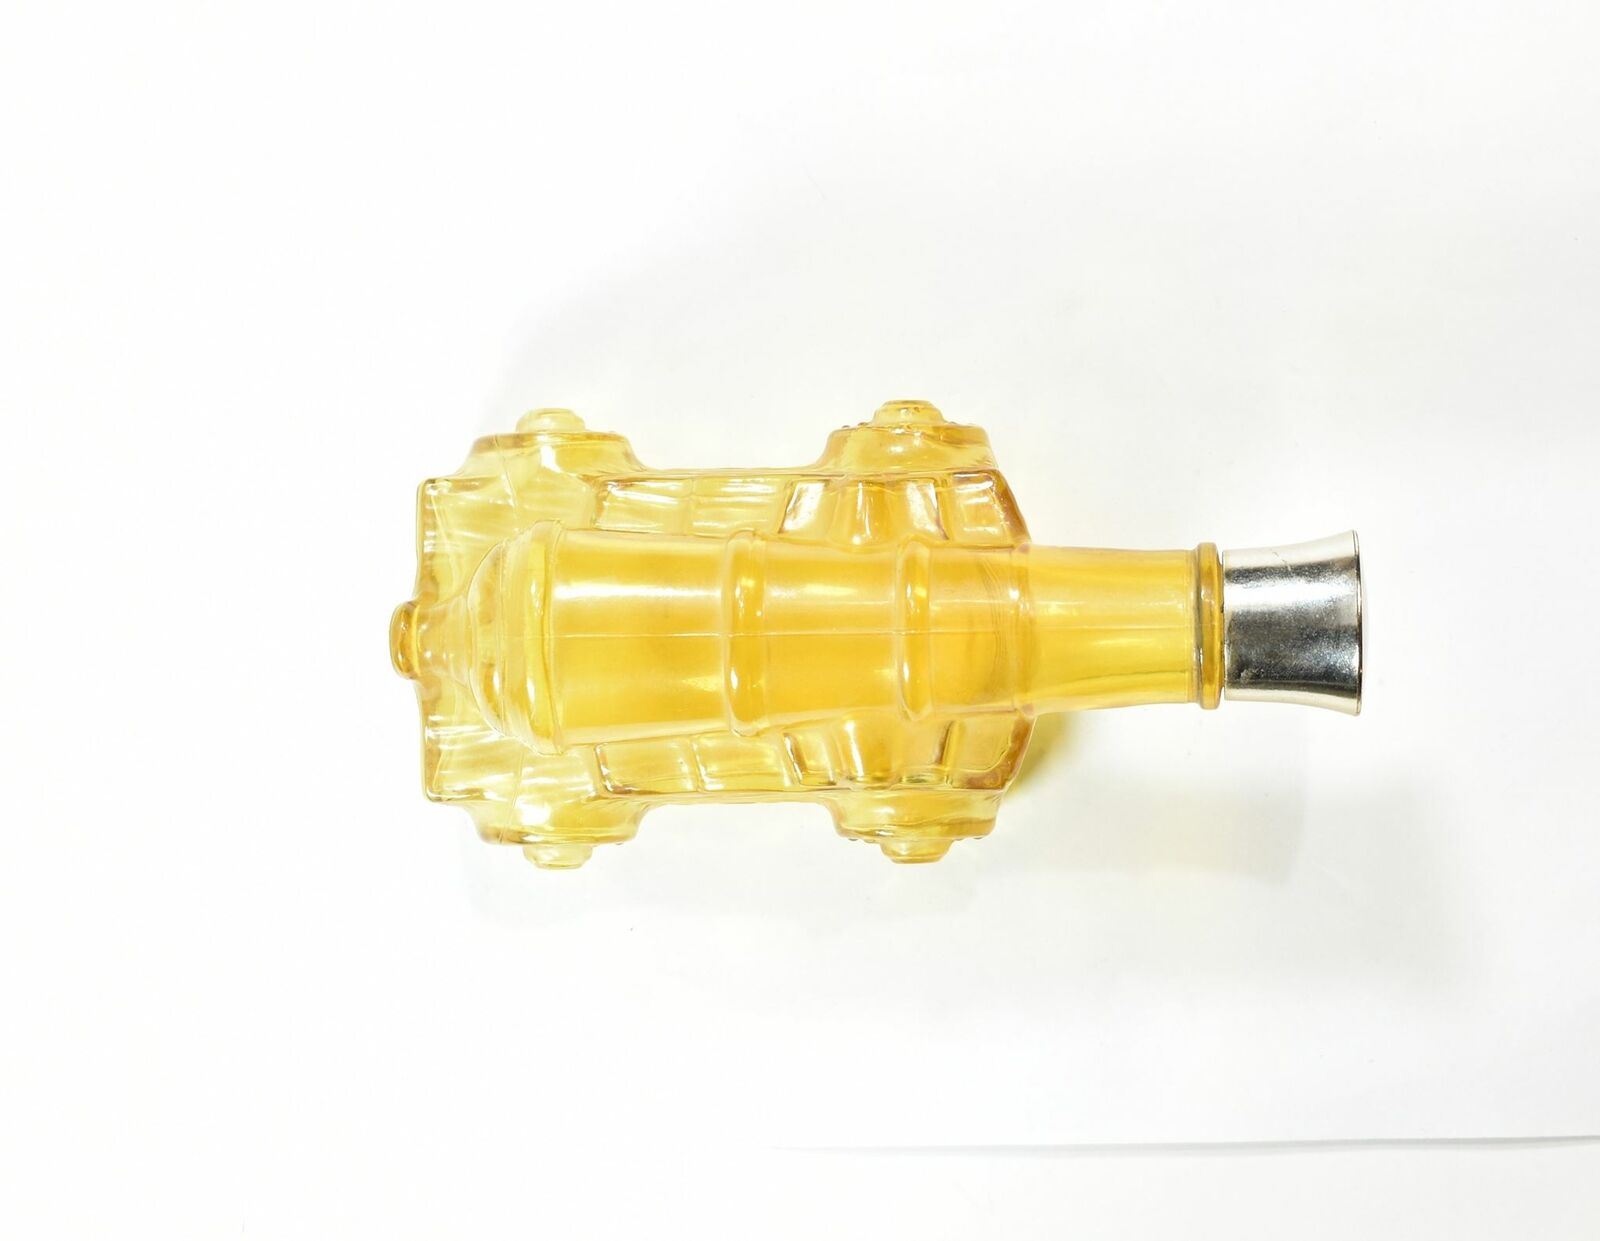 Avon After shave bottle used yellow cannon empty